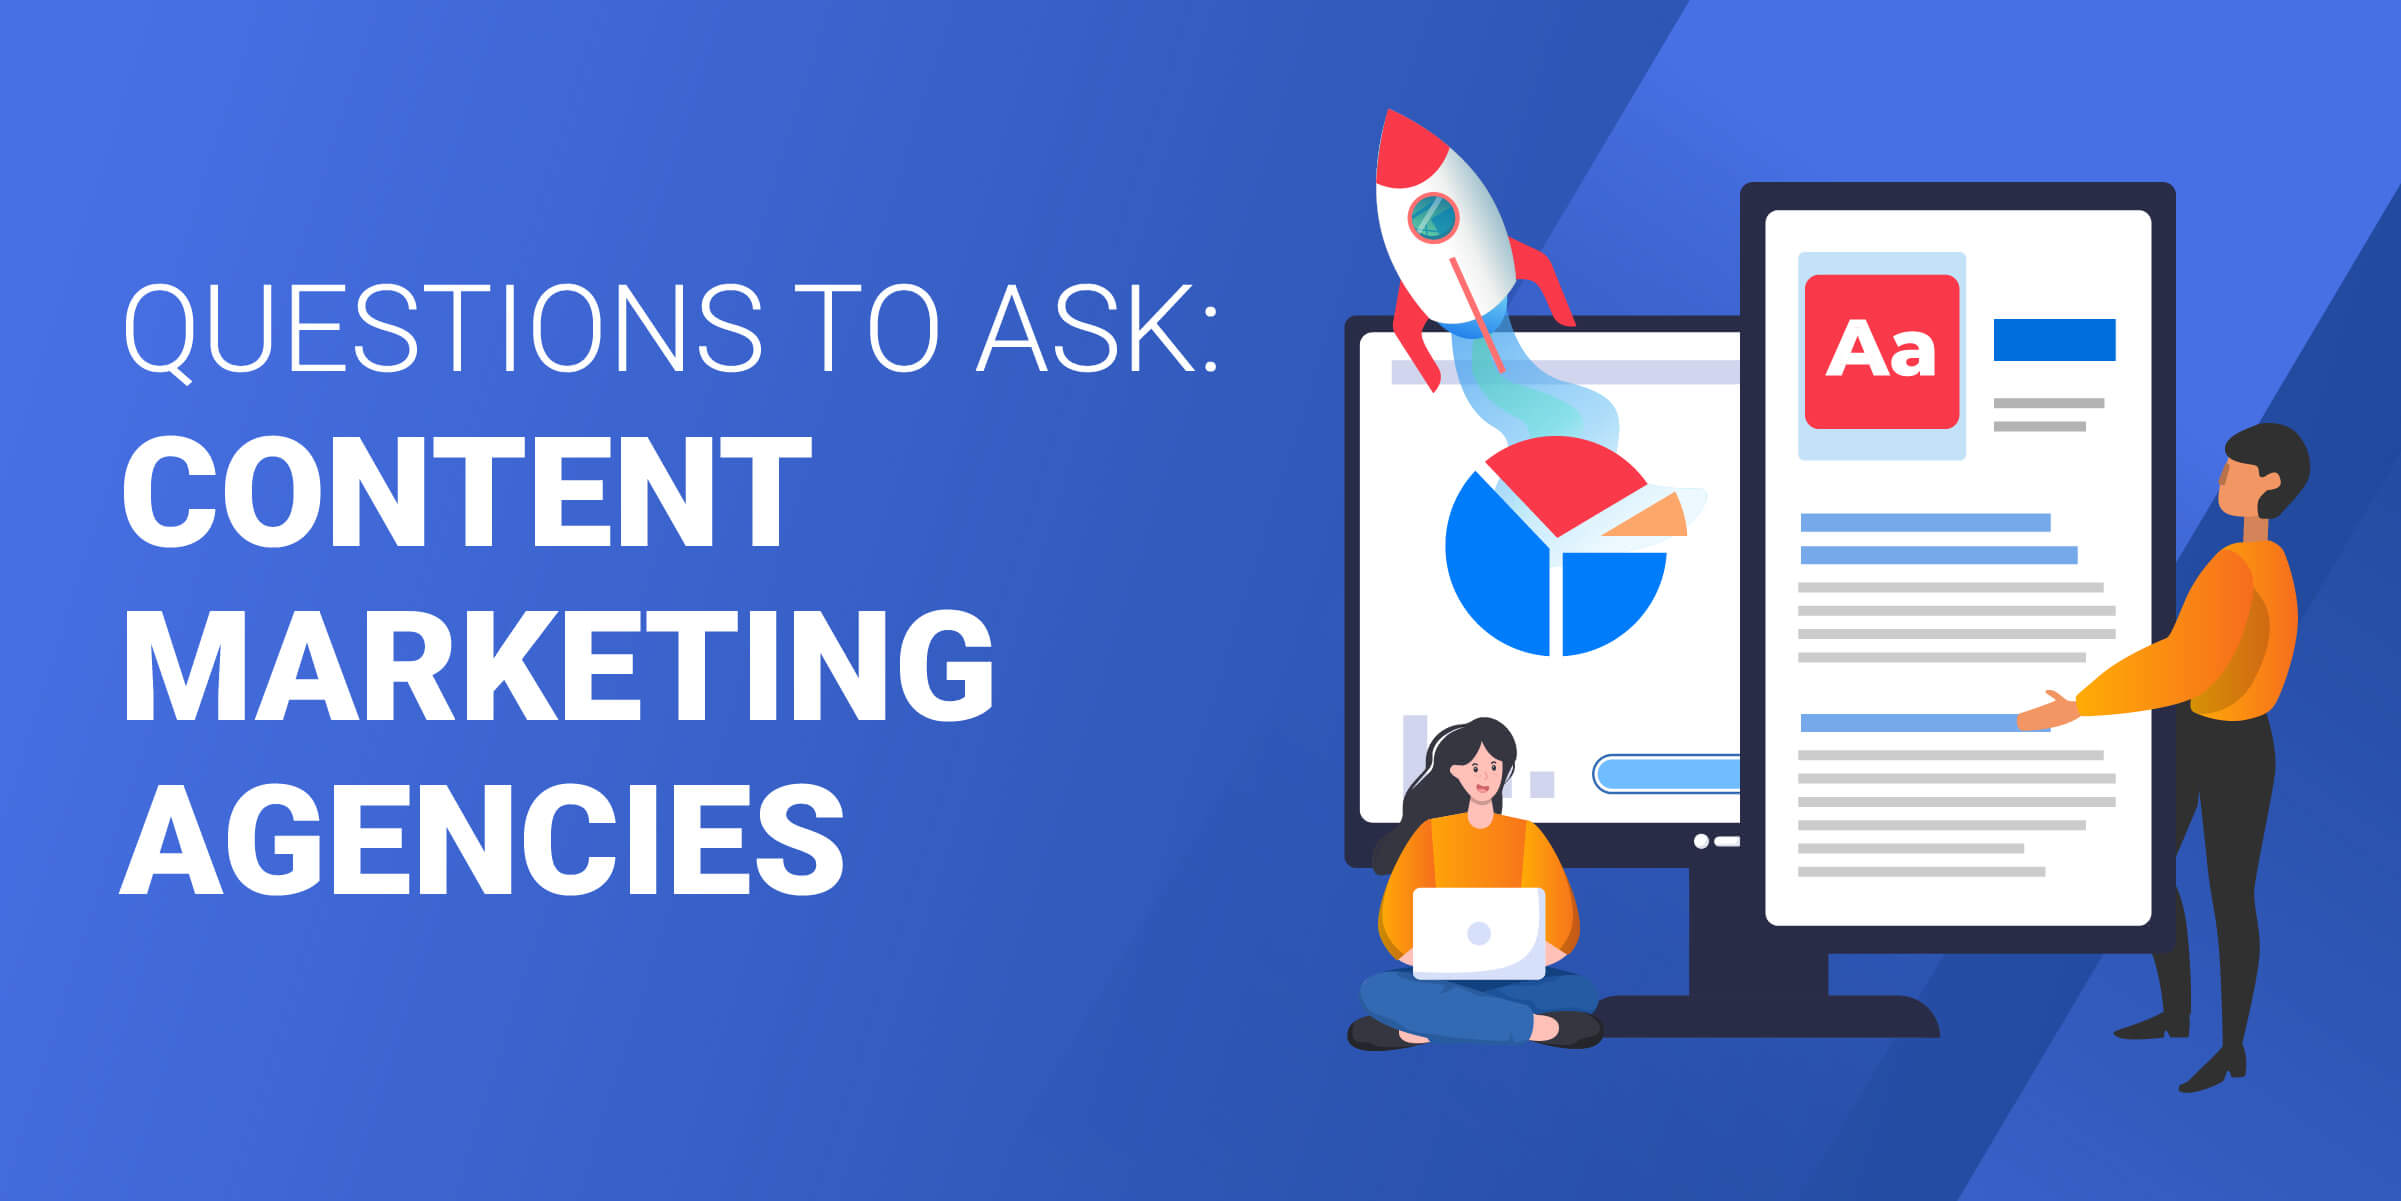 Questions to Ask Content Marketing Agencies